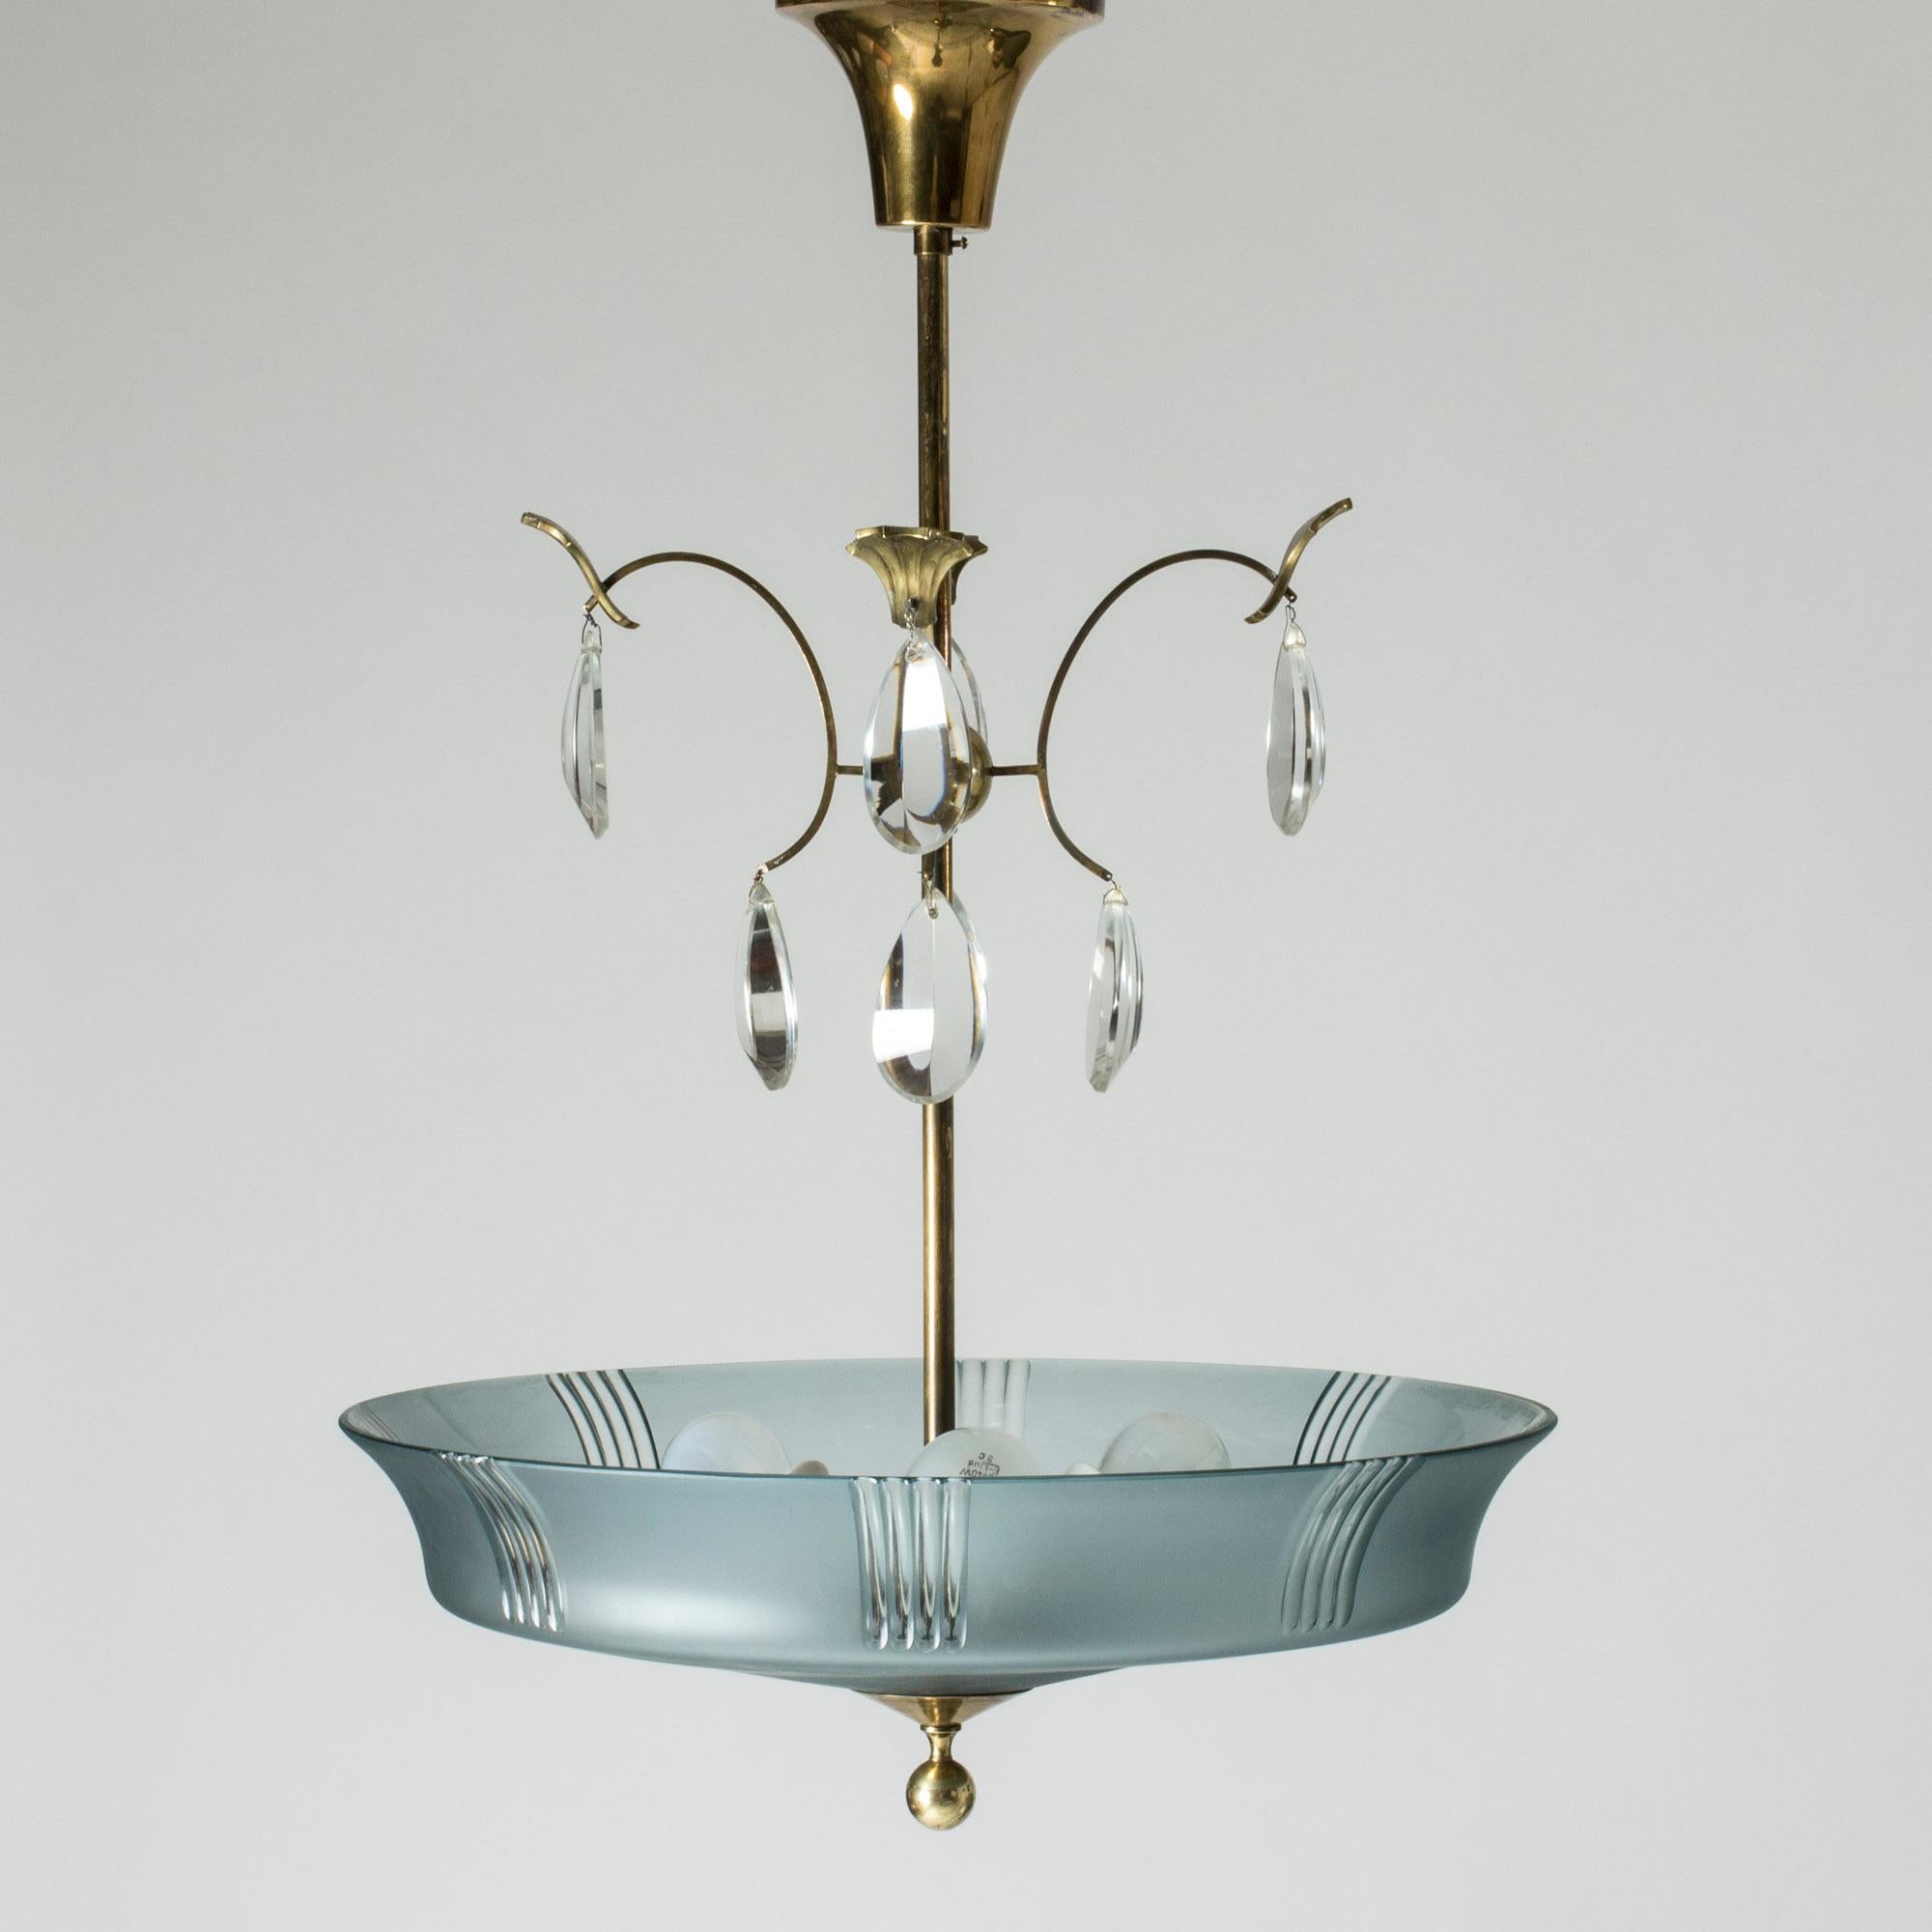 Beautiful chandelier by Elis Bergh, made from blue tinted, frosted glass. Graceful design with drop-shaped crystal glass prisms and decorative brass details.